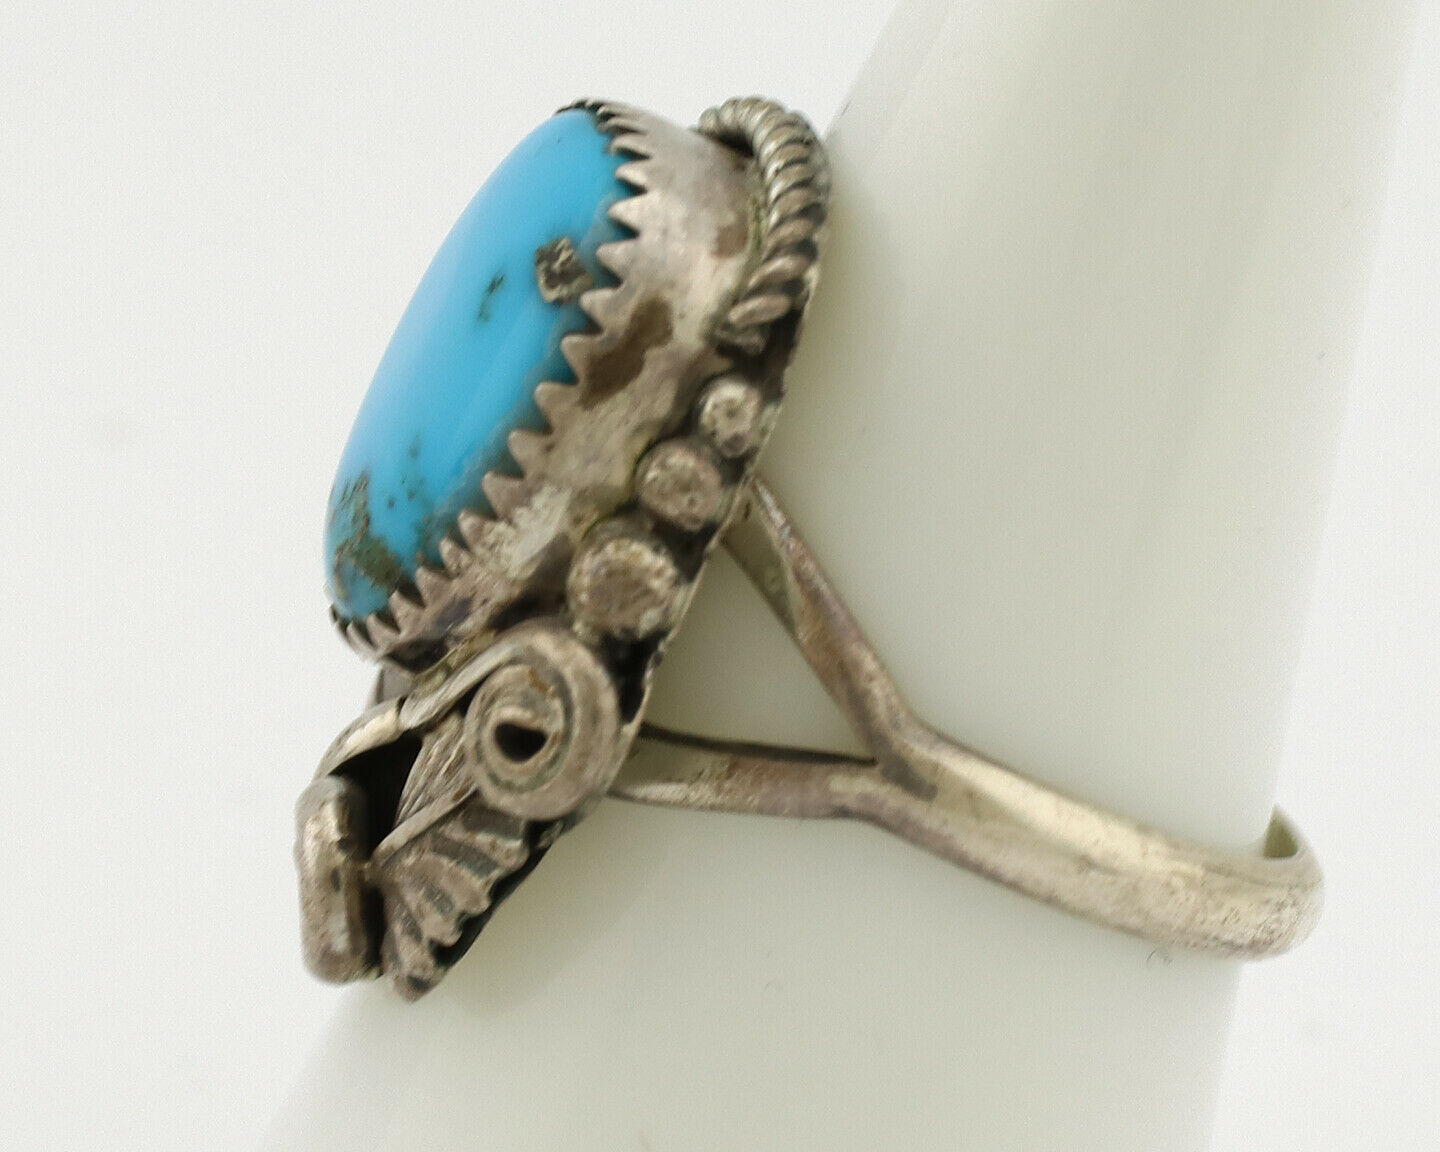 Navajo Ring .925 Silver Morenci Turquoise Artist Signed MC C.80's